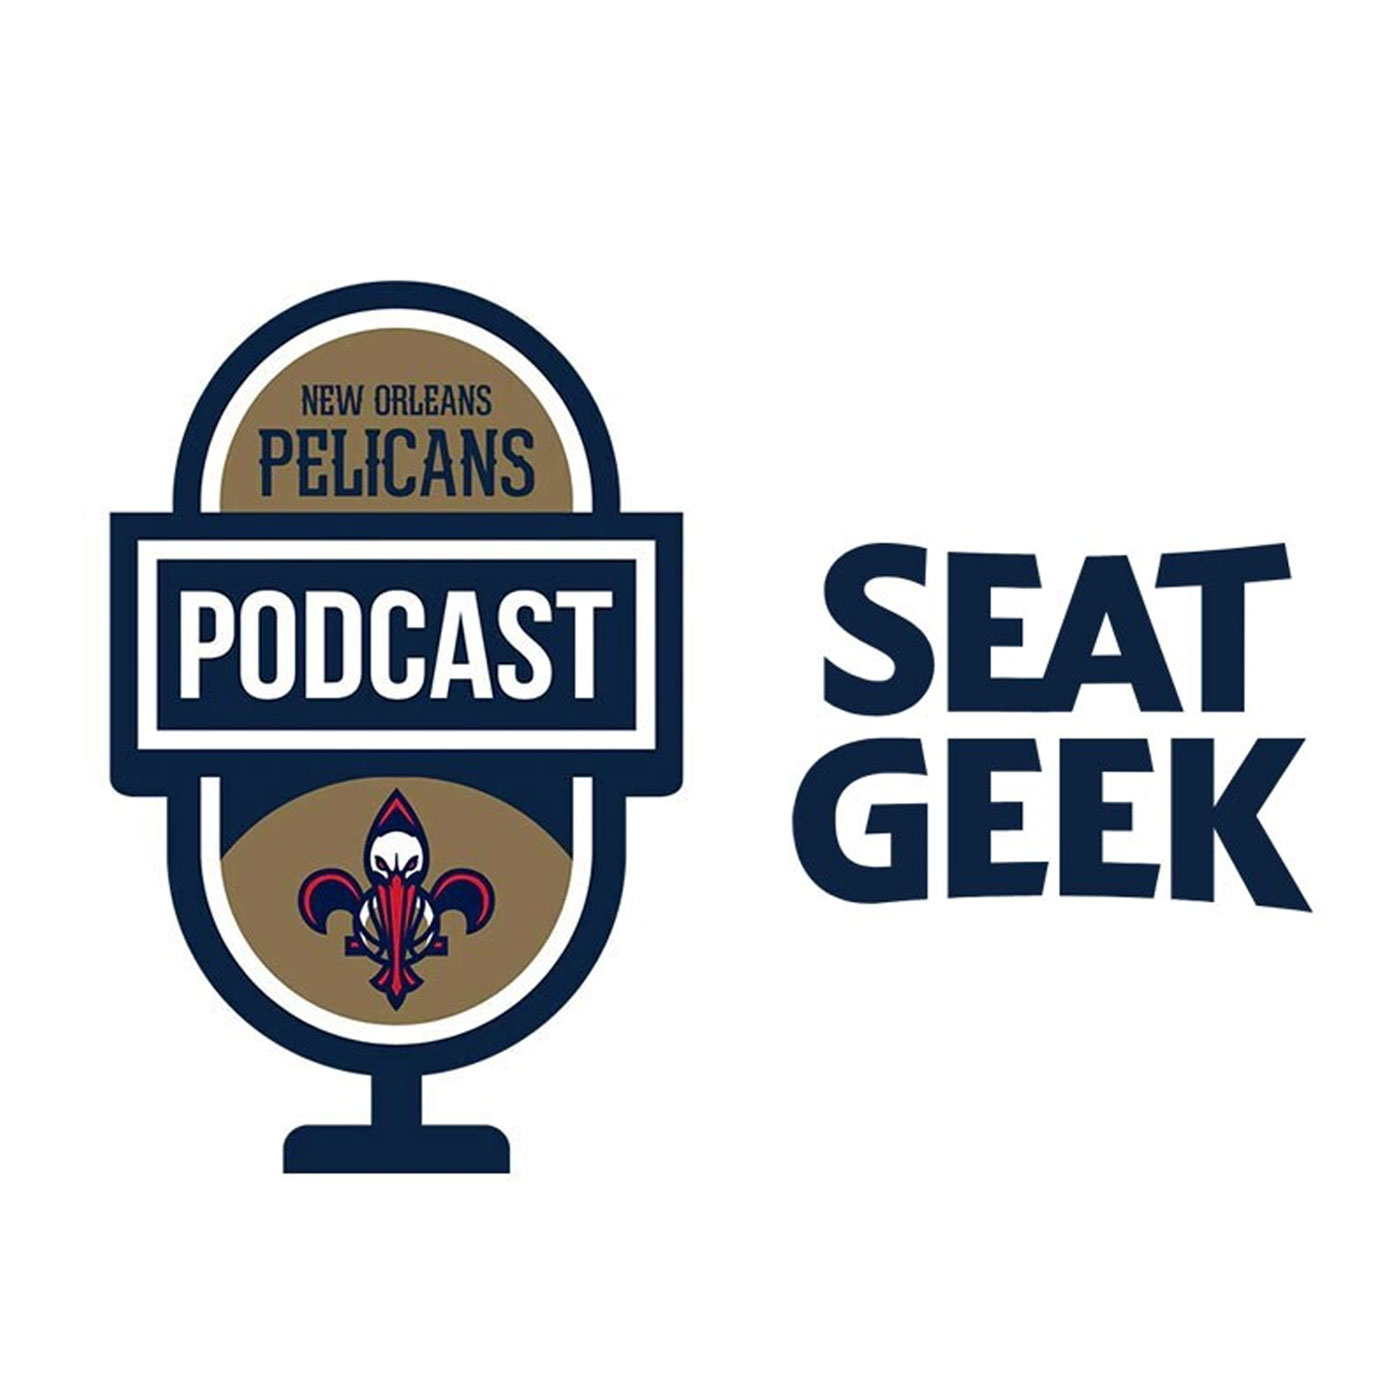 Todd Graffagnini on the New Orleans Pelicans Podcast presented by SeatGeek - January 7, 2022